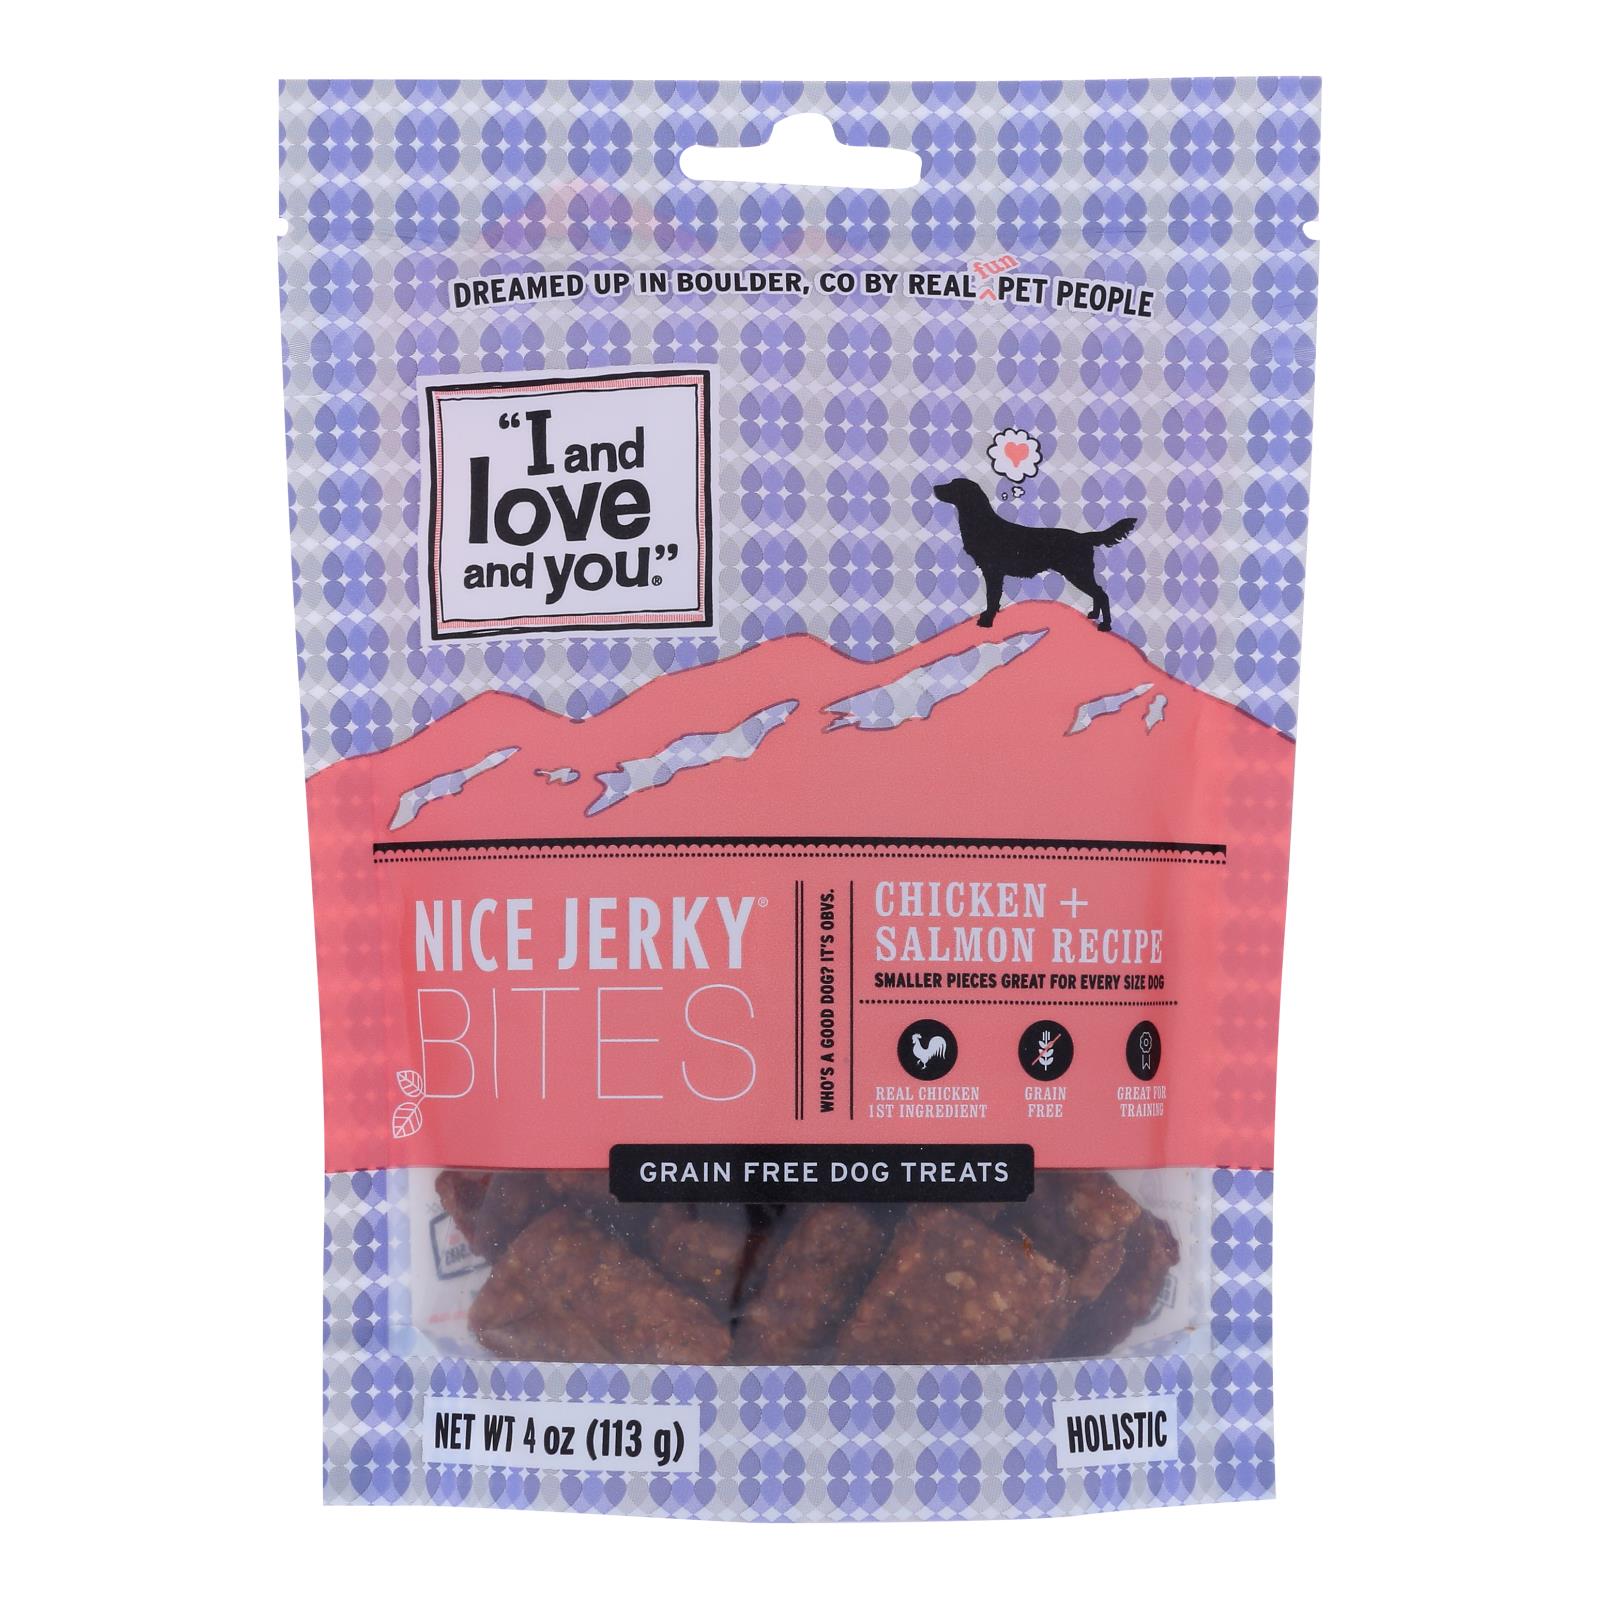 I And Love And You - Dog Treats Jrky Chkn&slmn - Case Of 6 - 4 Oz